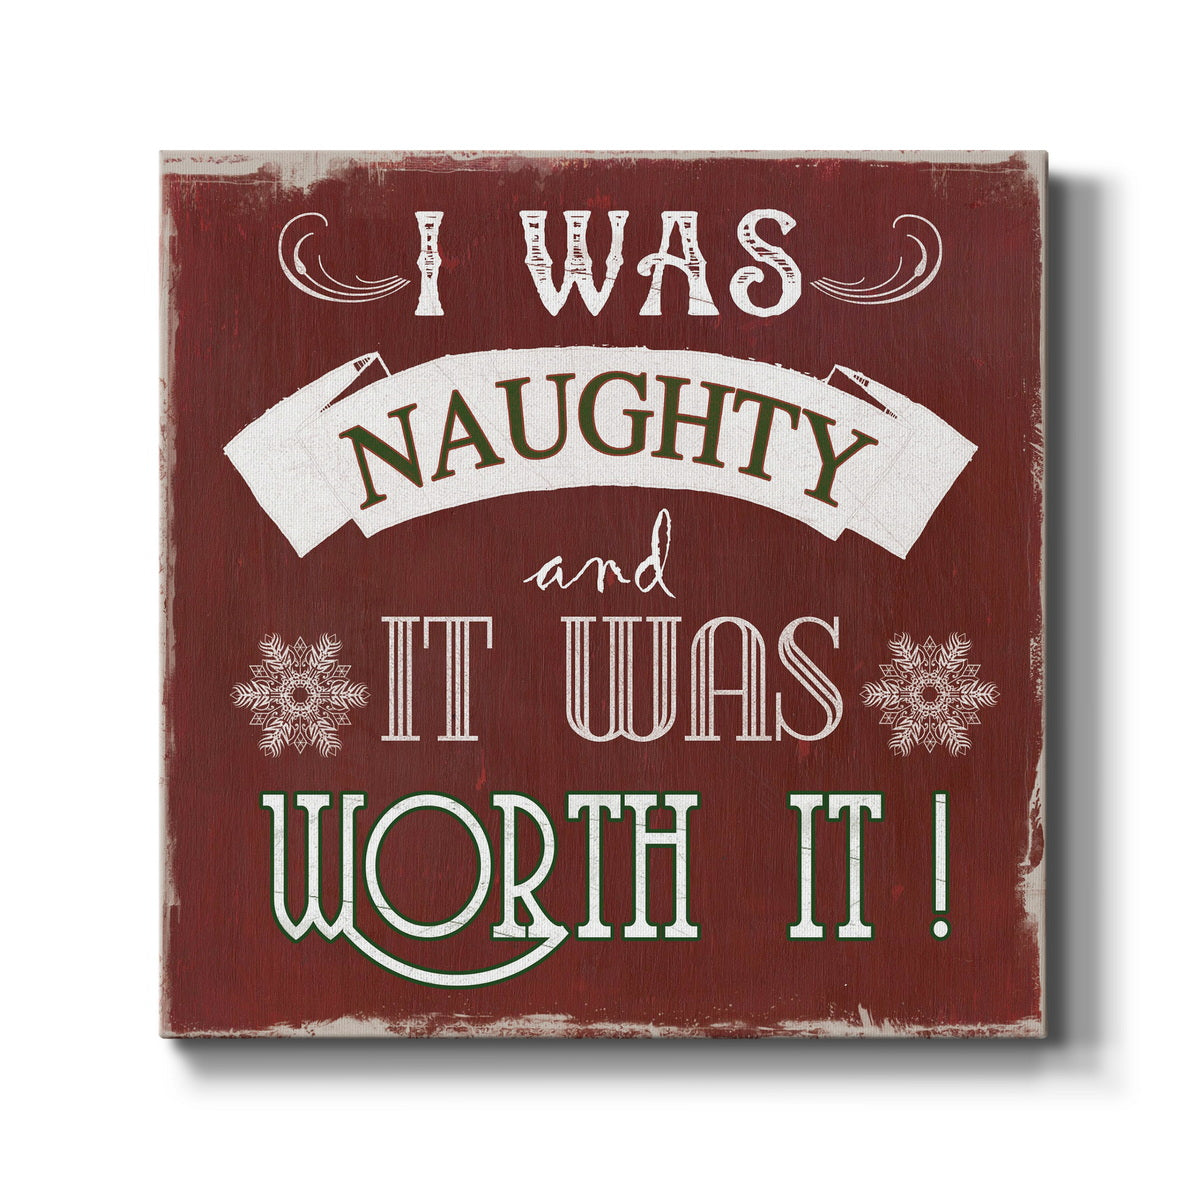 Naughty and Worth It Type